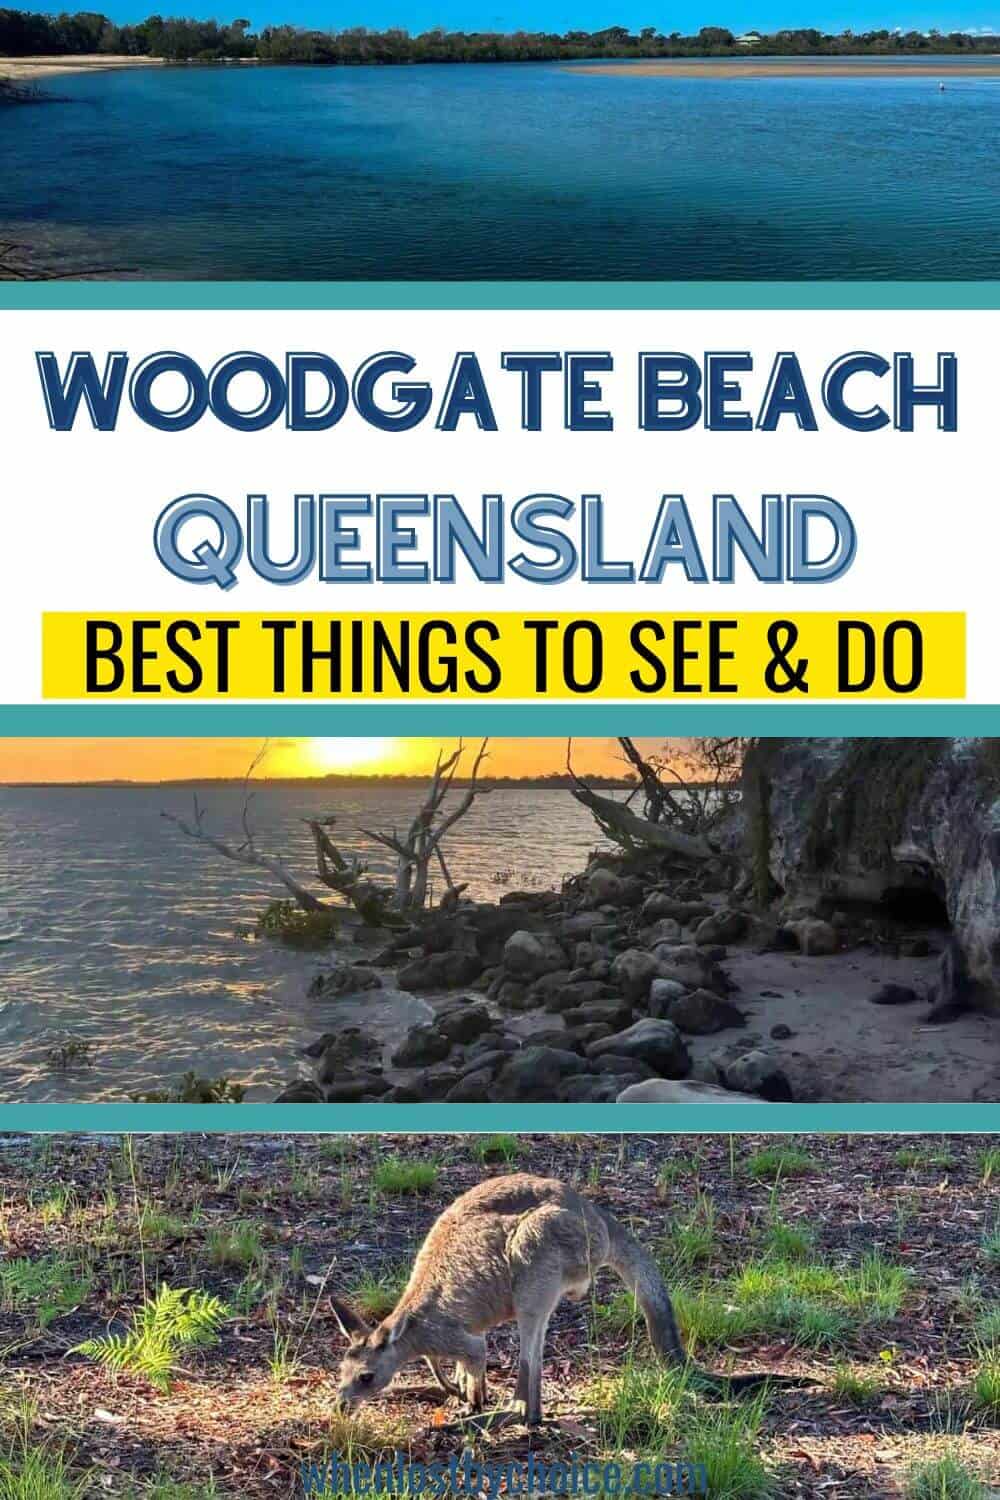 image collage of woodgate beach and text box that reads best thing to do in woodgate beach queensland